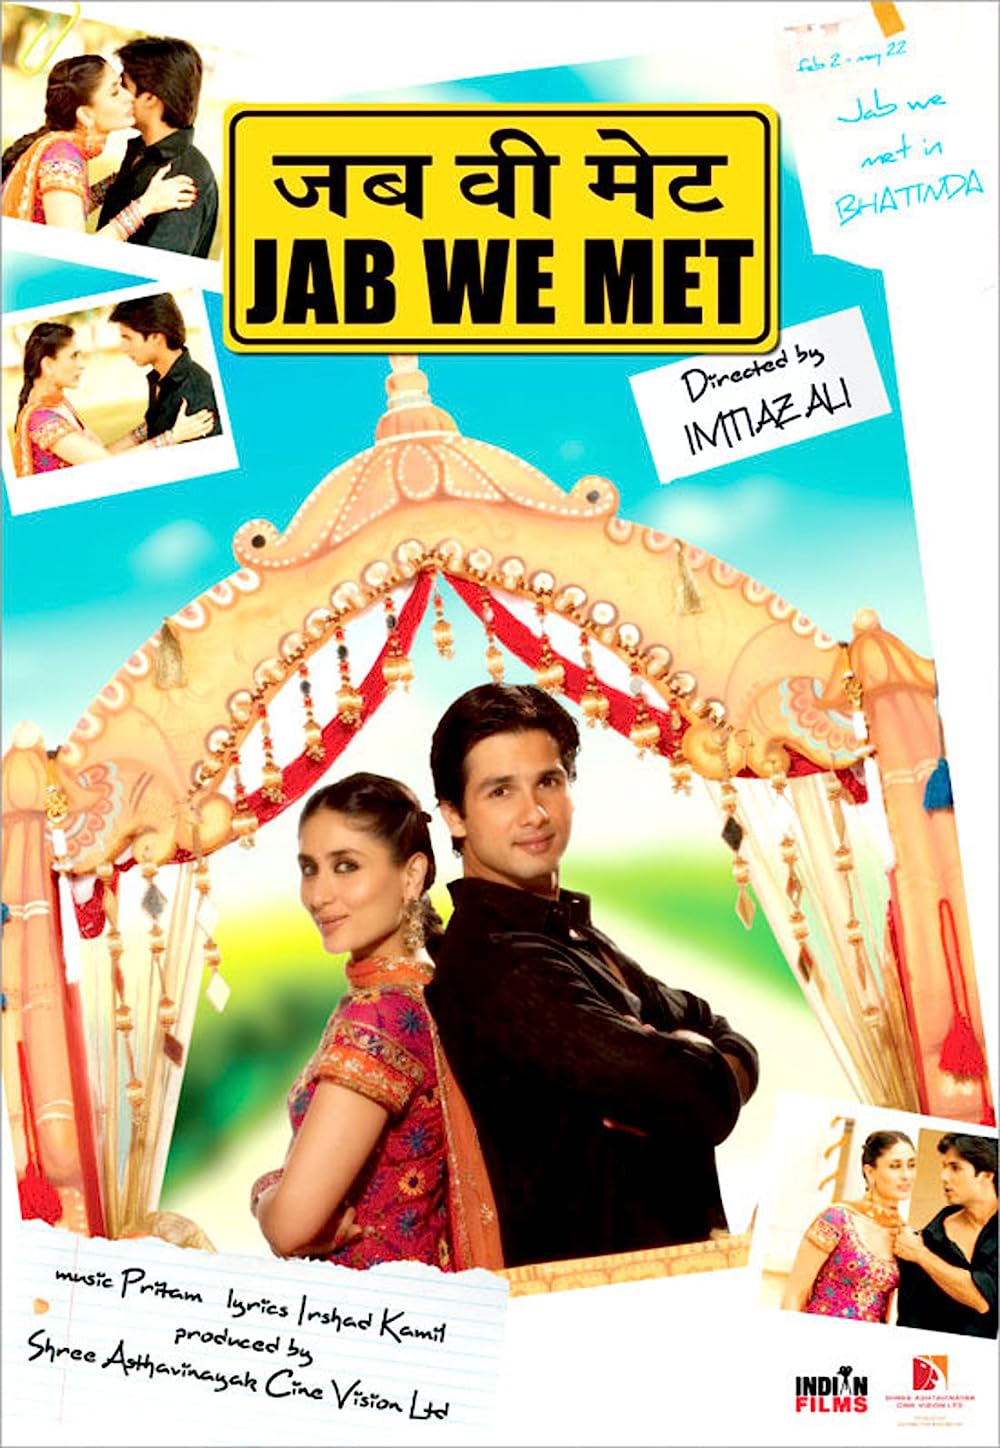 'Jab We Met' is one the most iconic films of all time. In this gallery, we'll explore all the looks Geet donned that not only was a moment to define in the film but also had repercussions in the real world